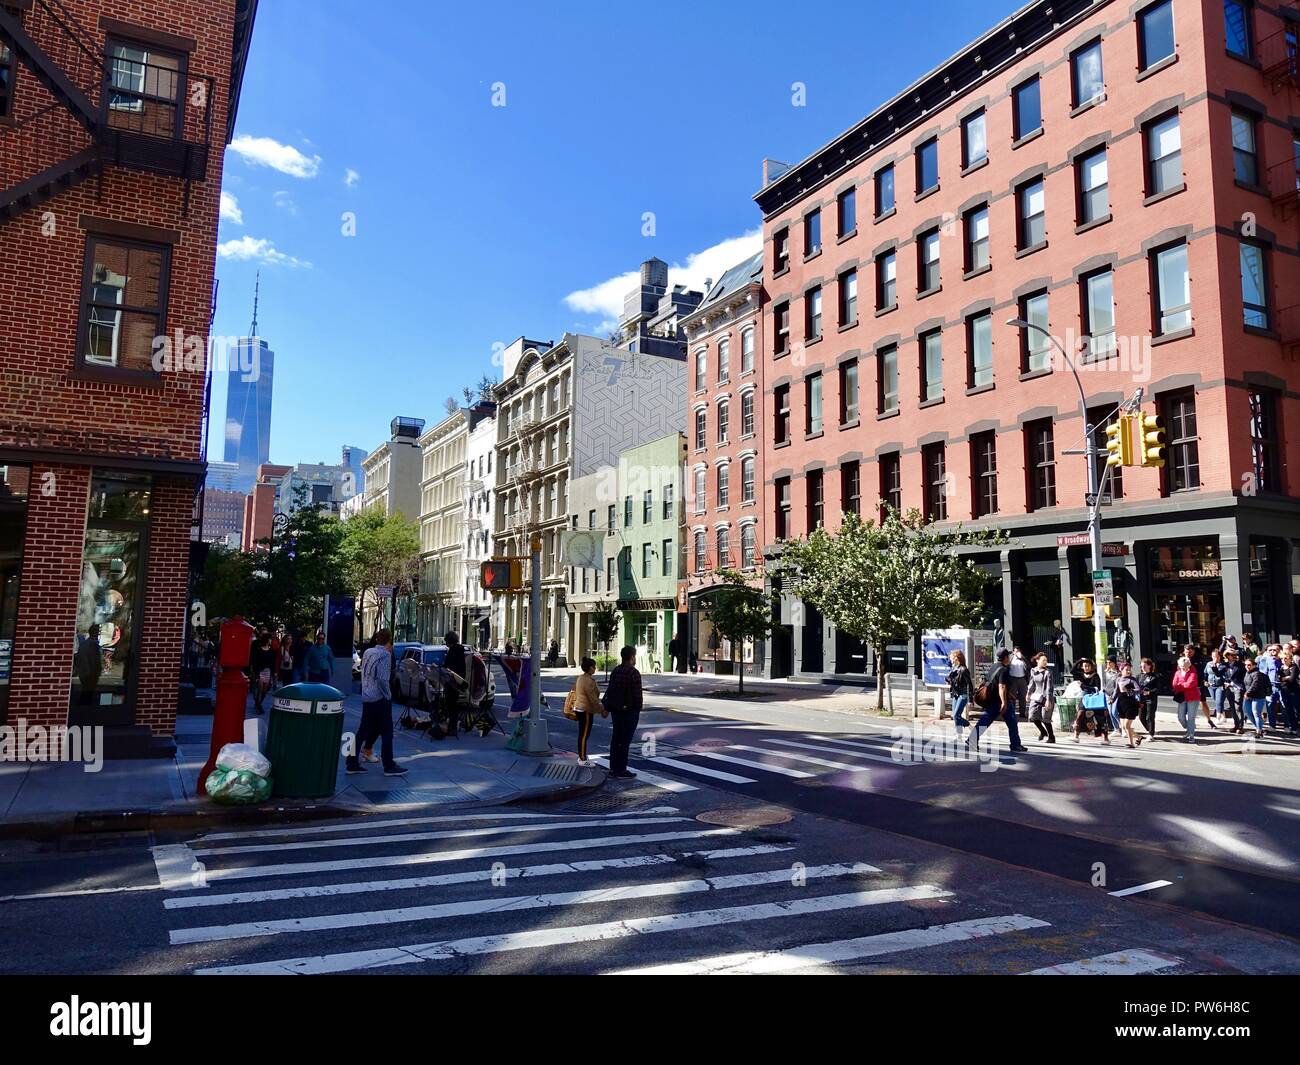 Apartment building with shops, people, with 1 World Trade Center in the background, at intersection of West Broadway and Spring St, New York, NY, USA. Stock Photo